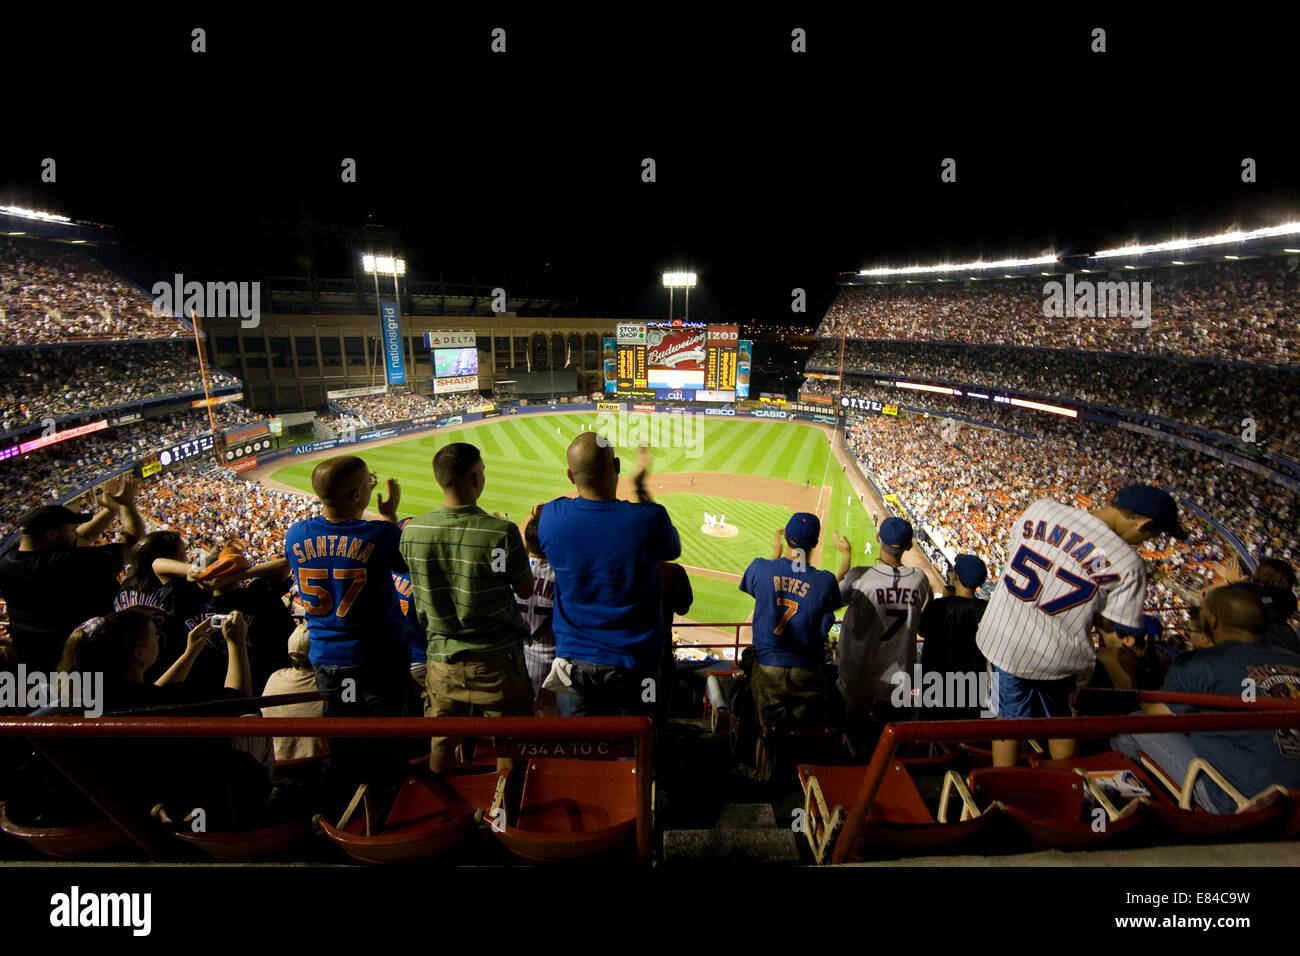 Spectators at a baseball game in the Mets stadium in New York City Stock Photo